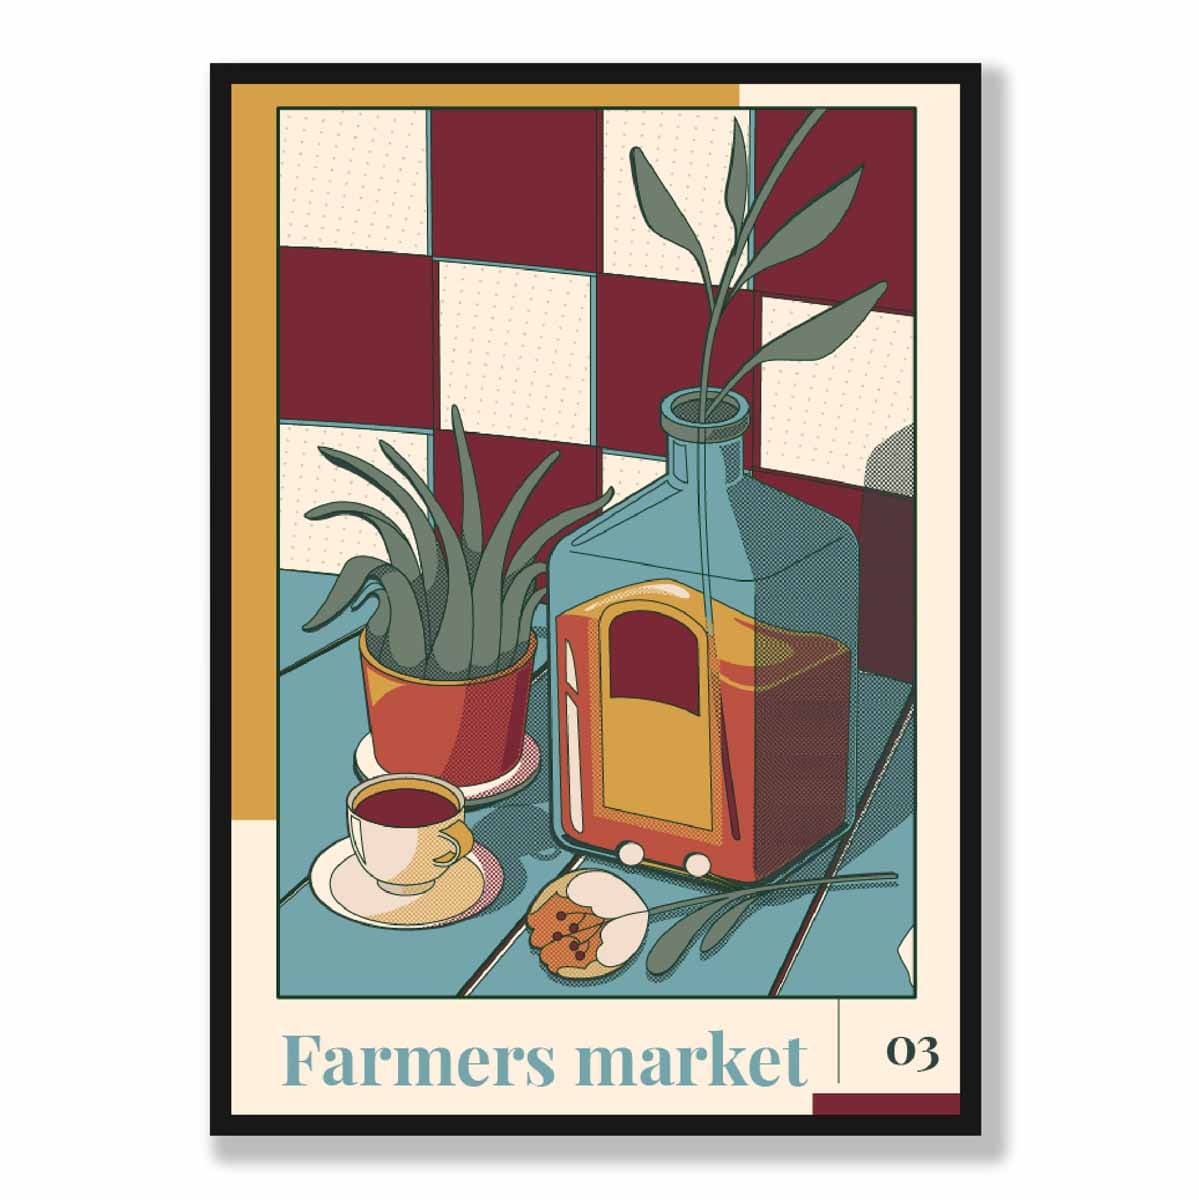 Farmers Market Poster No 3 in Damson Red and Blue